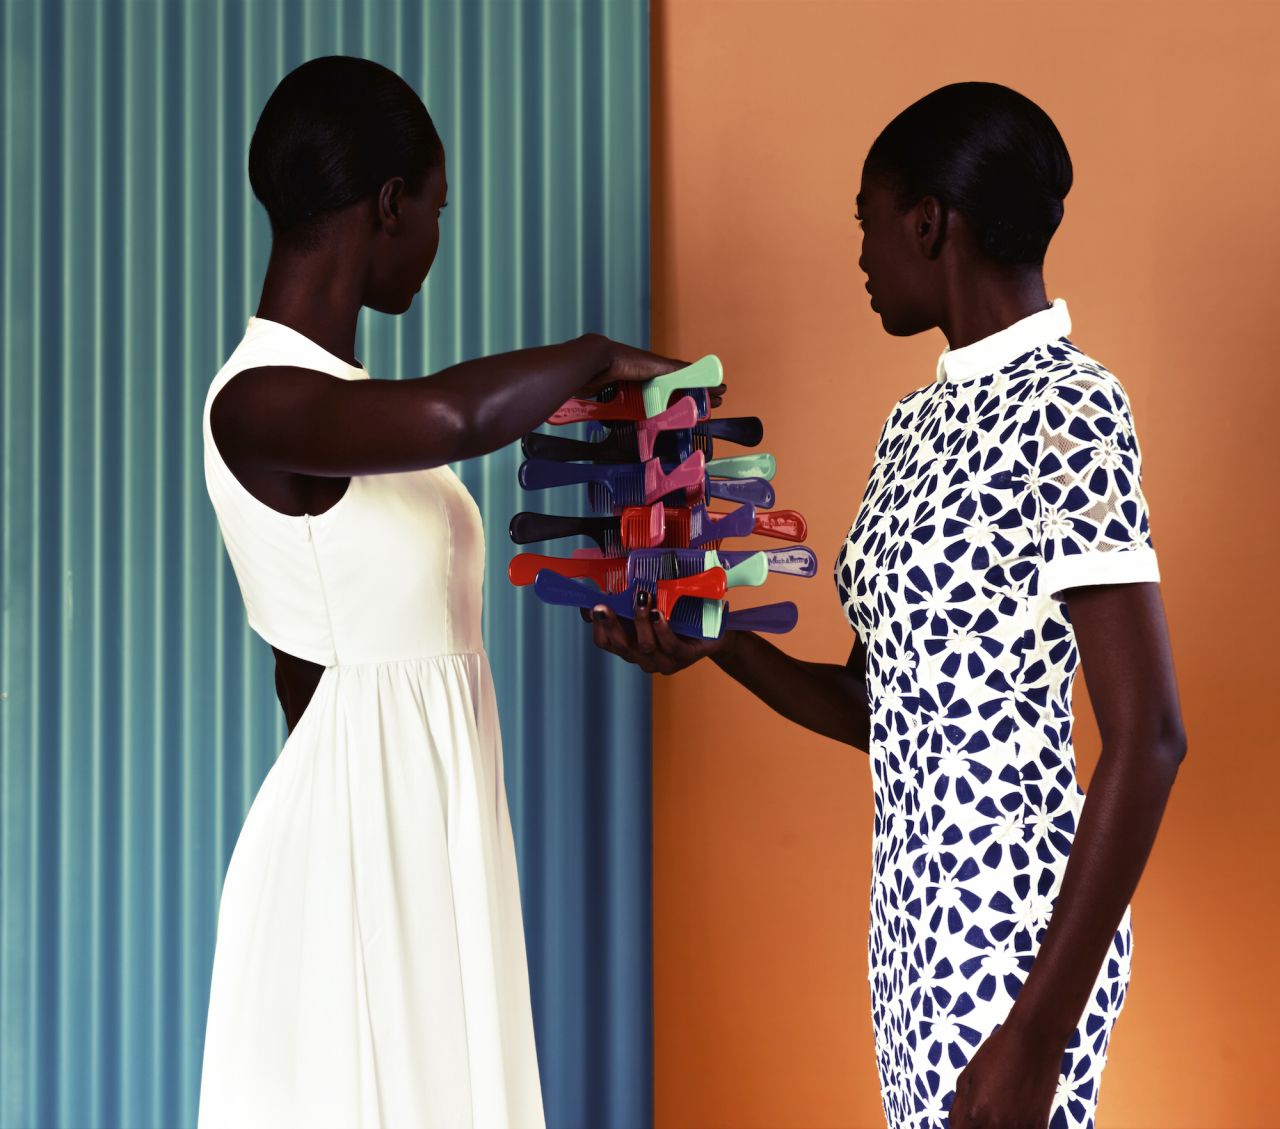 The rate of growth for Africa's household consumption was down from 5.2 percent in 2010 to 3.9 percent in 2015. Nonetheless, African consumerism was the fastest growing of any region except emerging Asia according to McKinsey Global Institute.<br /><br />Pictured: South Africa brand Kisua, an online clothing retailer launched by Ghanaian entrepreneur Samuel Mensah.